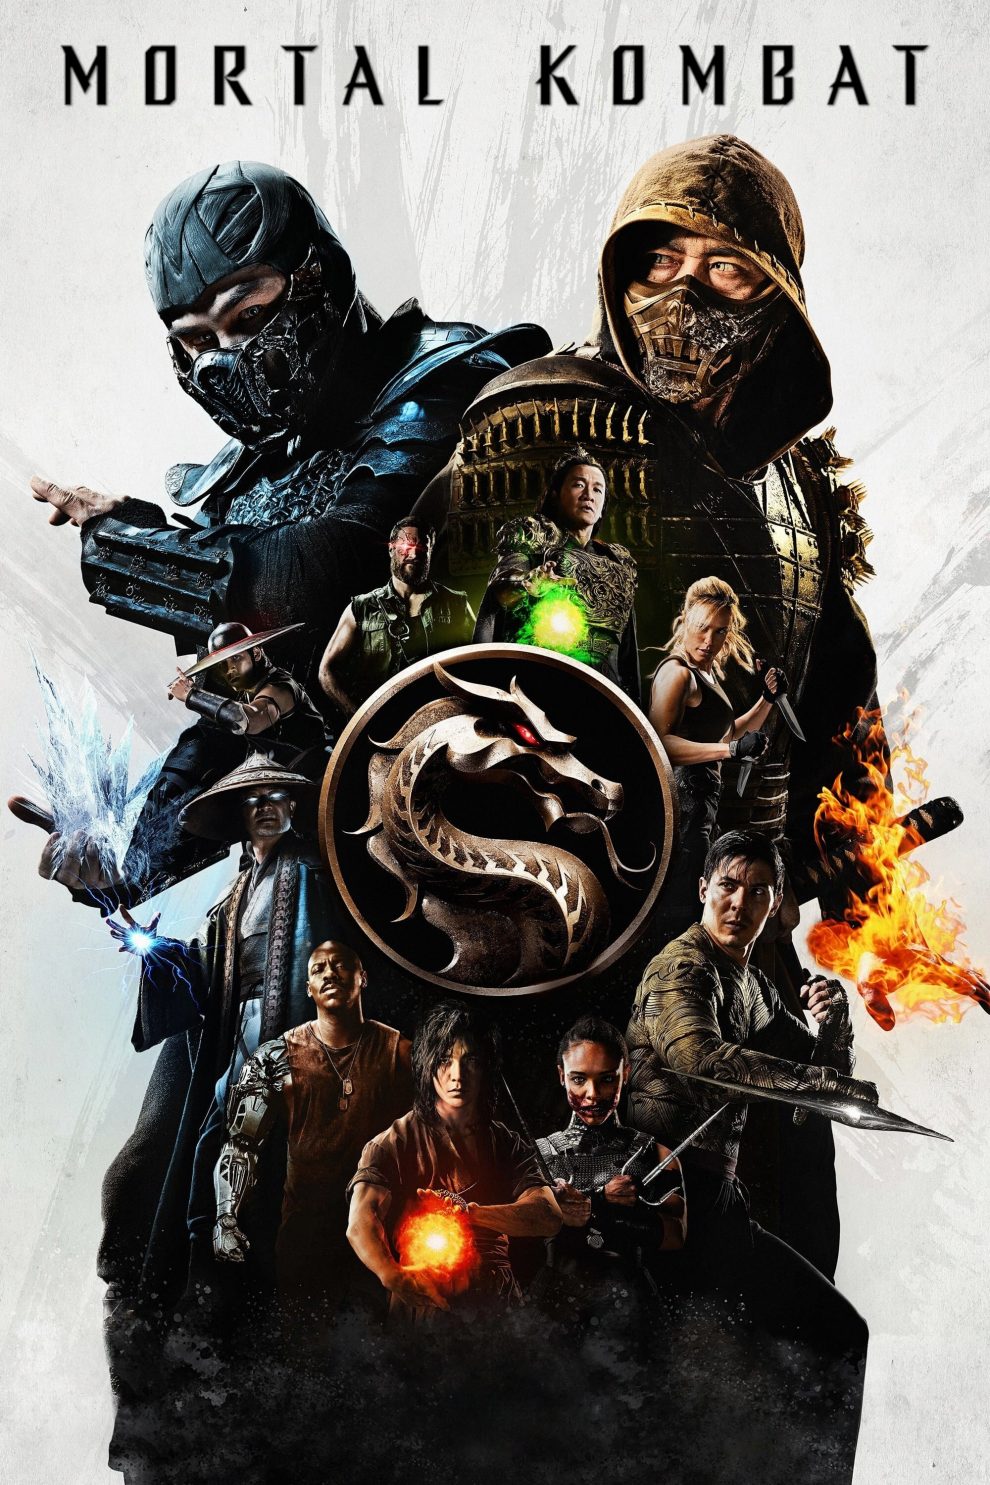 Poster for the movie "Mortal Kombat"